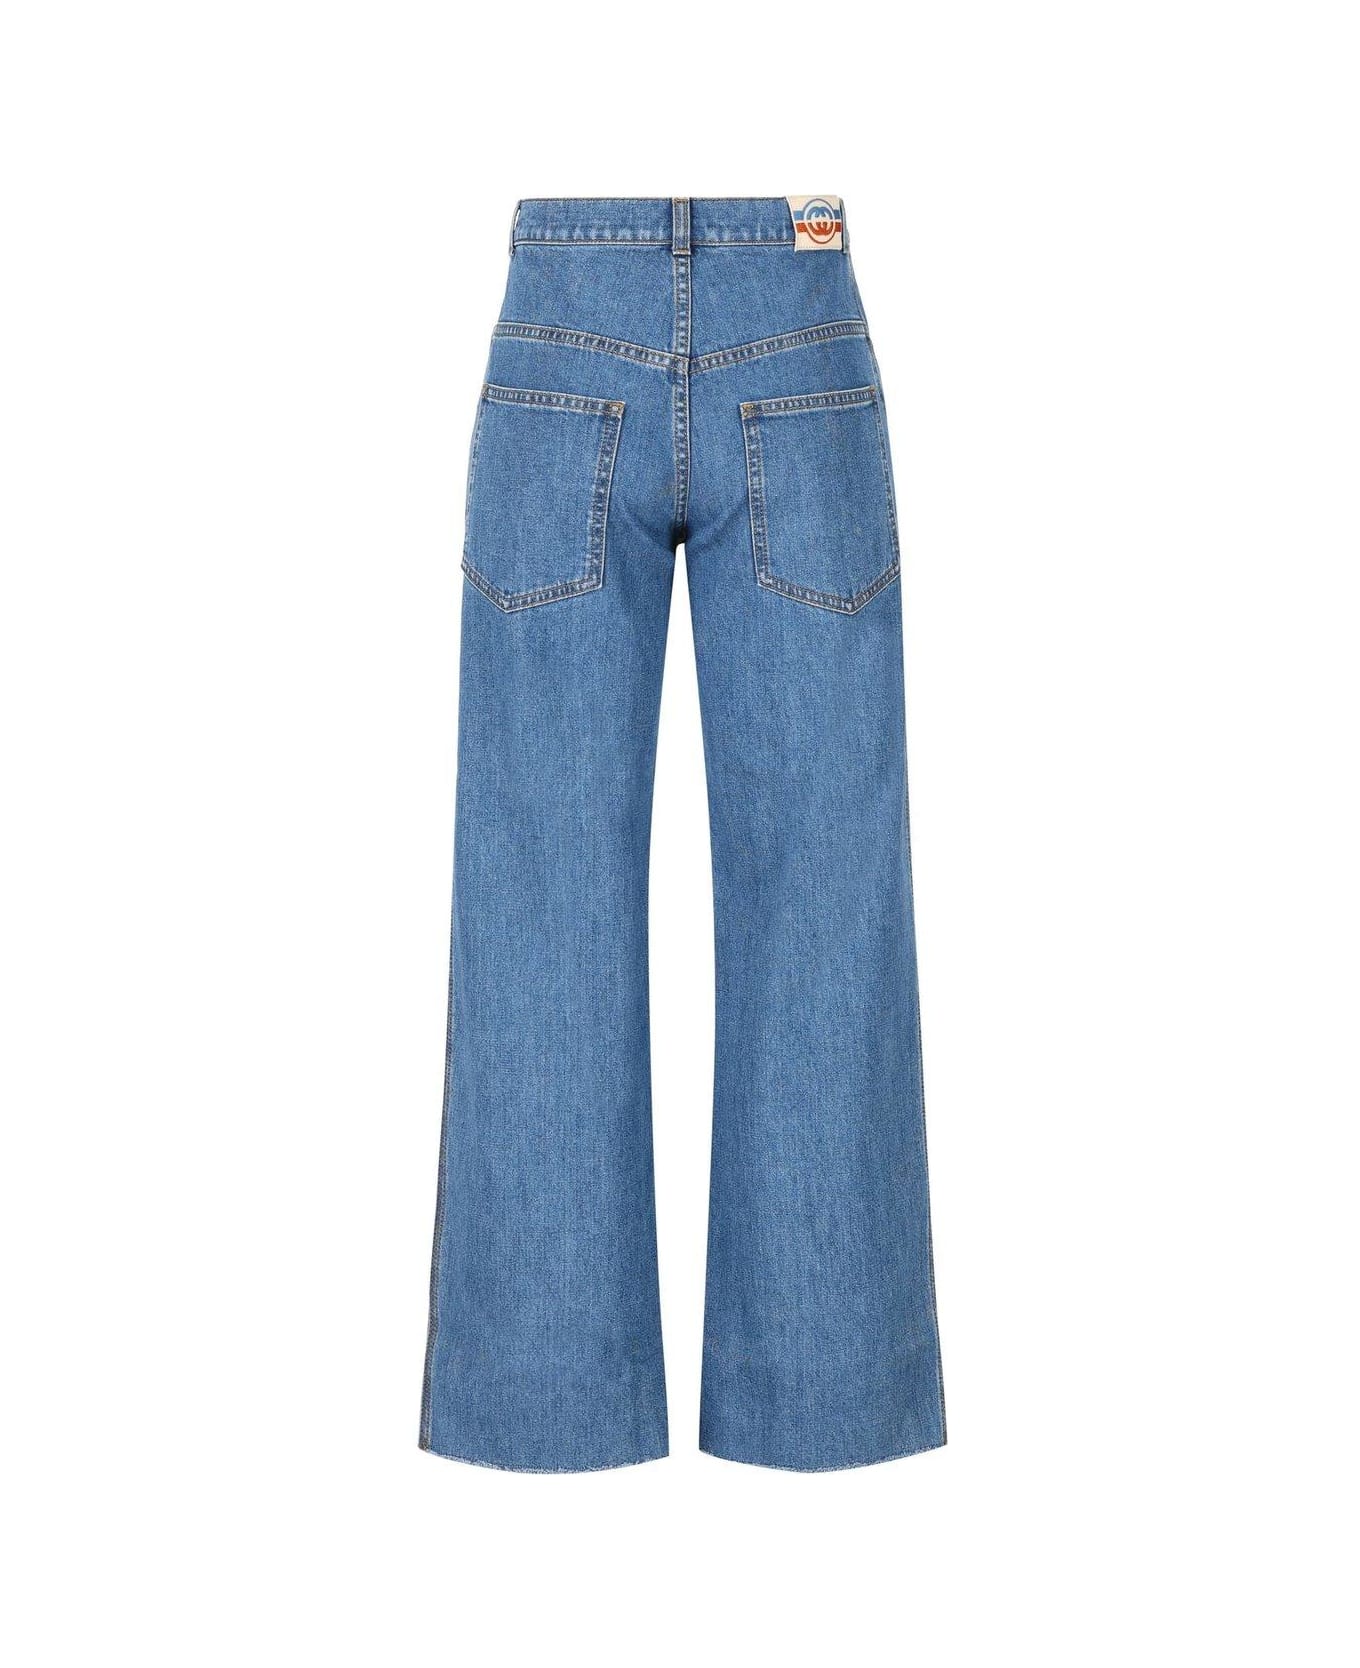 Gucci Logo Patch Flared Jeans - Blue ボトムス